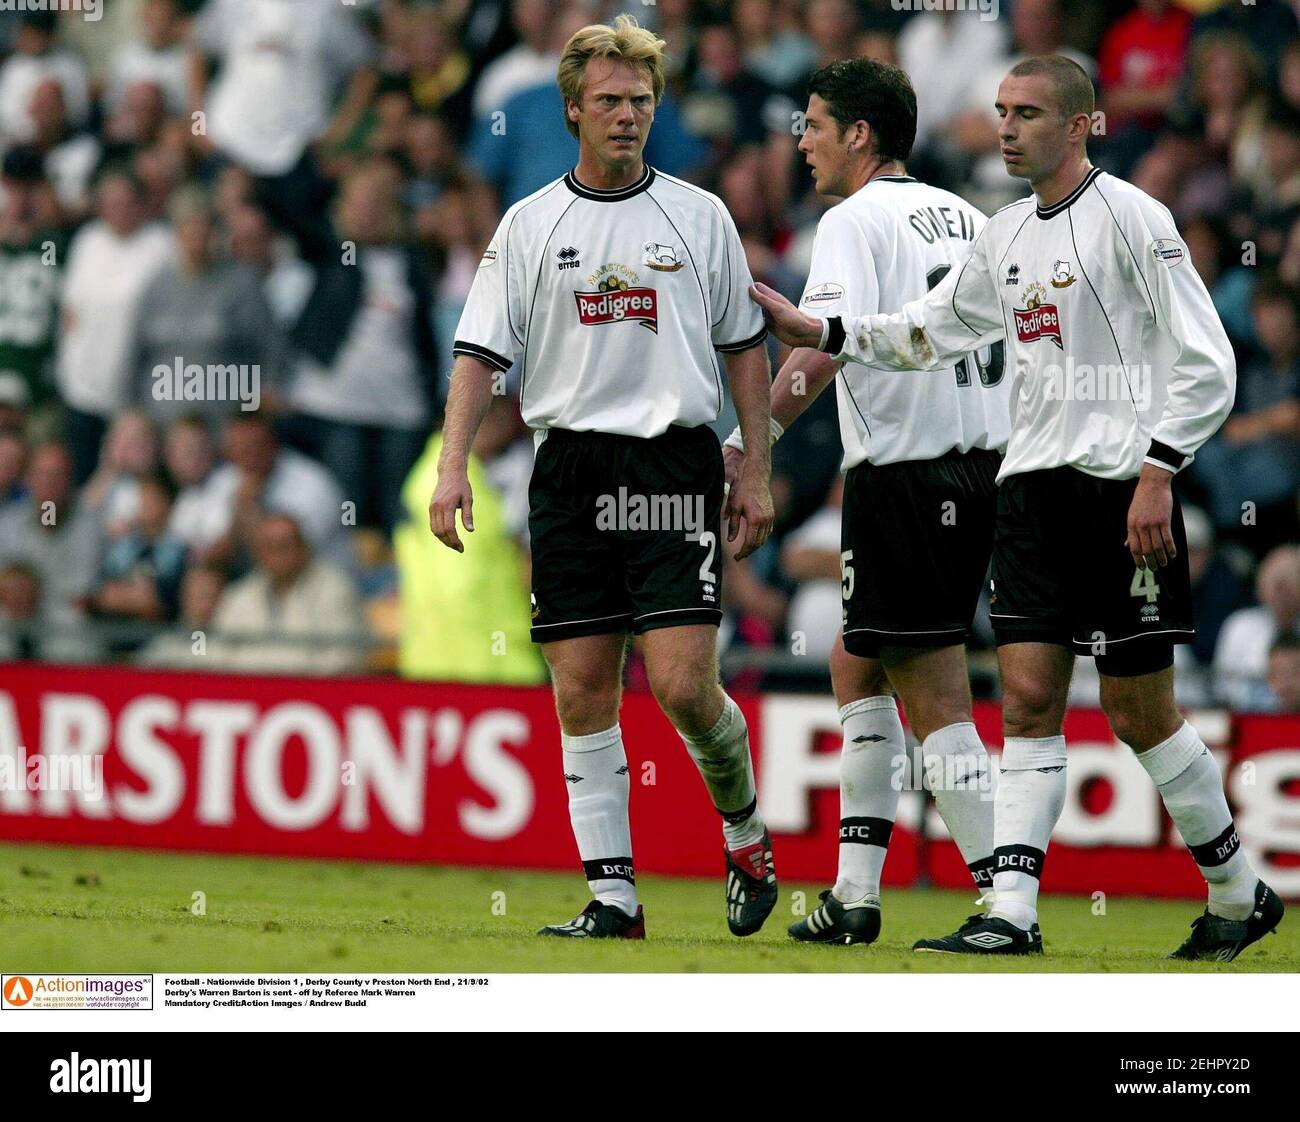 Football - Nationwide Division 1 , Derby County v Preston North End , 21/9/02  Derby's Warren Barton is sent - off by Referee Mark Warren  Mandatory Credit:Action Images / Andrew Budd Stock Photo